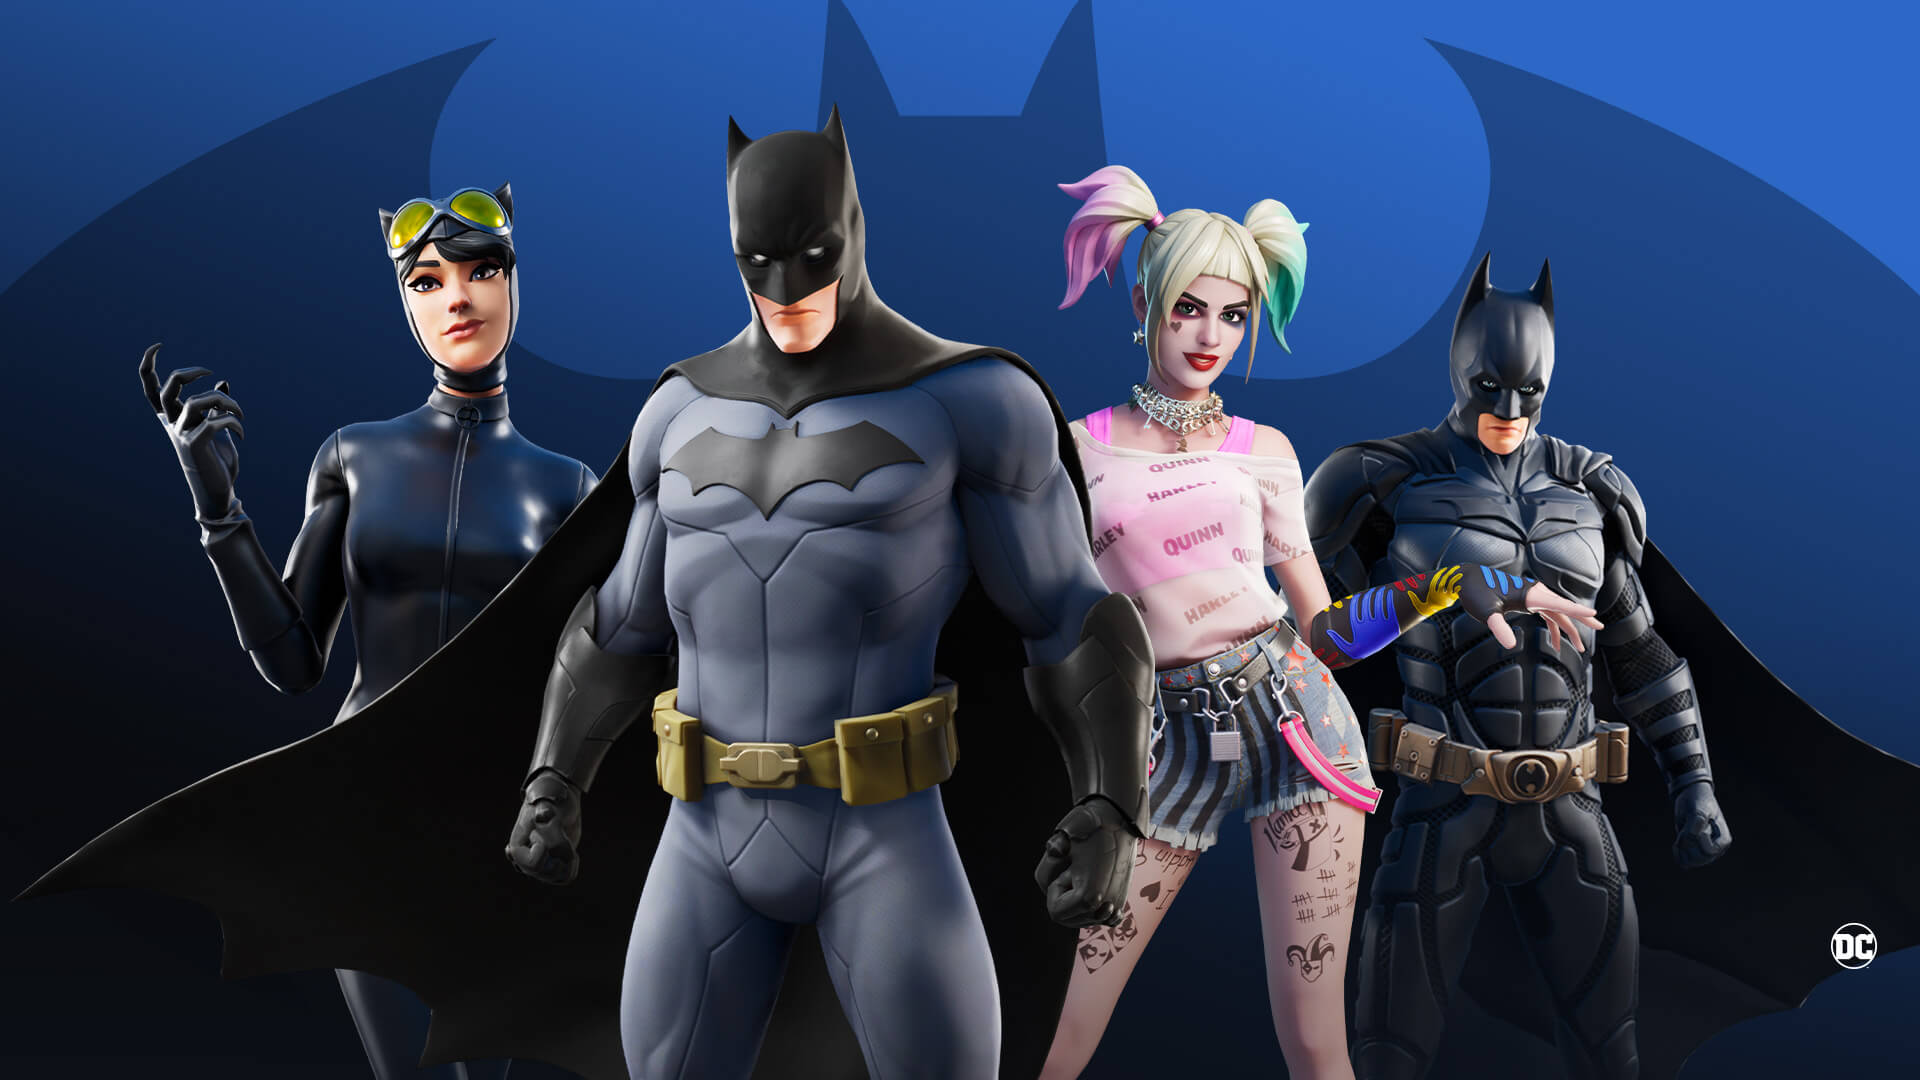 Batman returns to Fortnite with a Dose of Gotham City Heroism